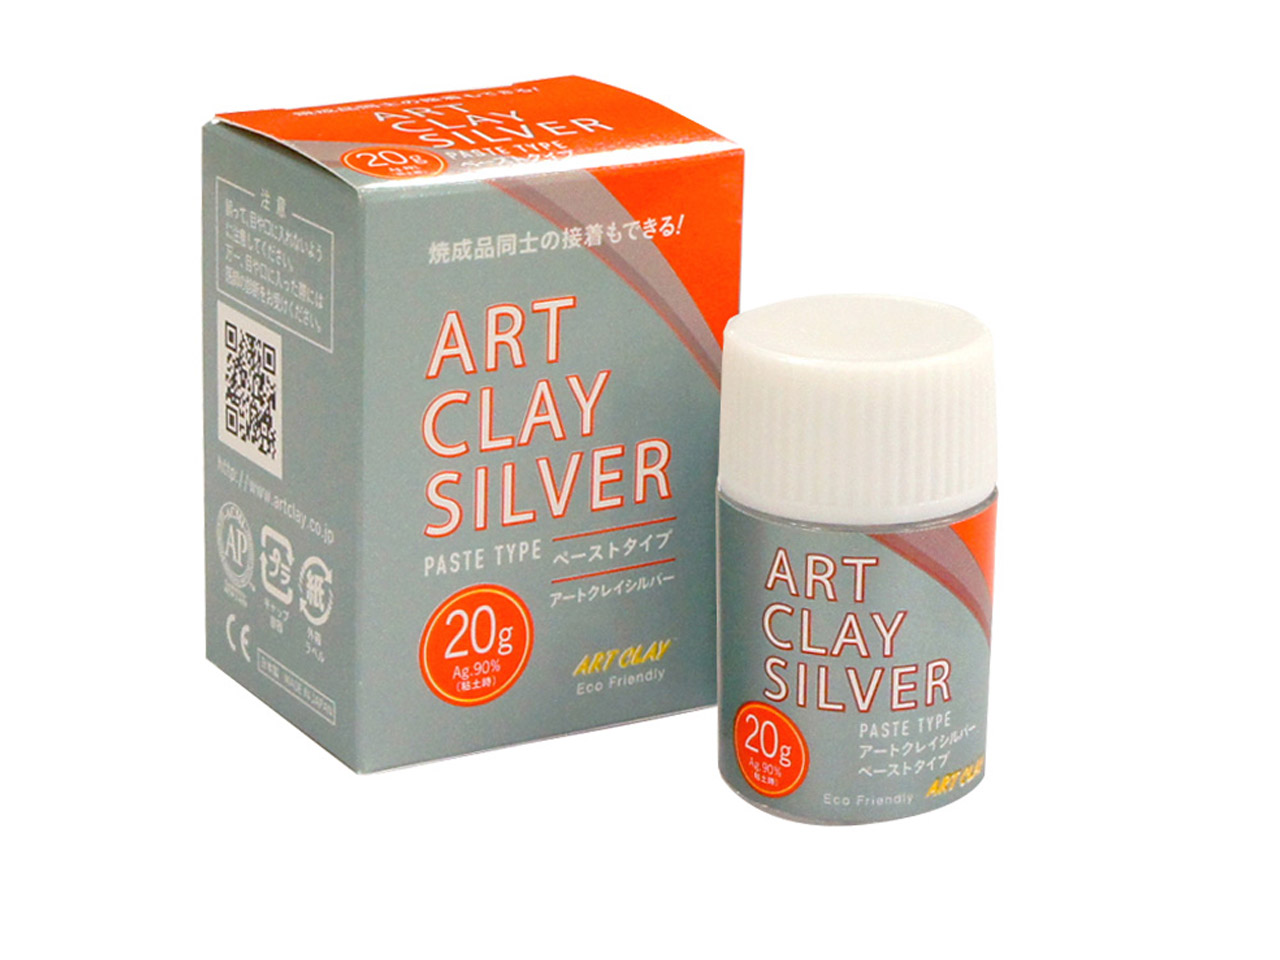 Art Clay Silver 20g Paste Questions & Answers